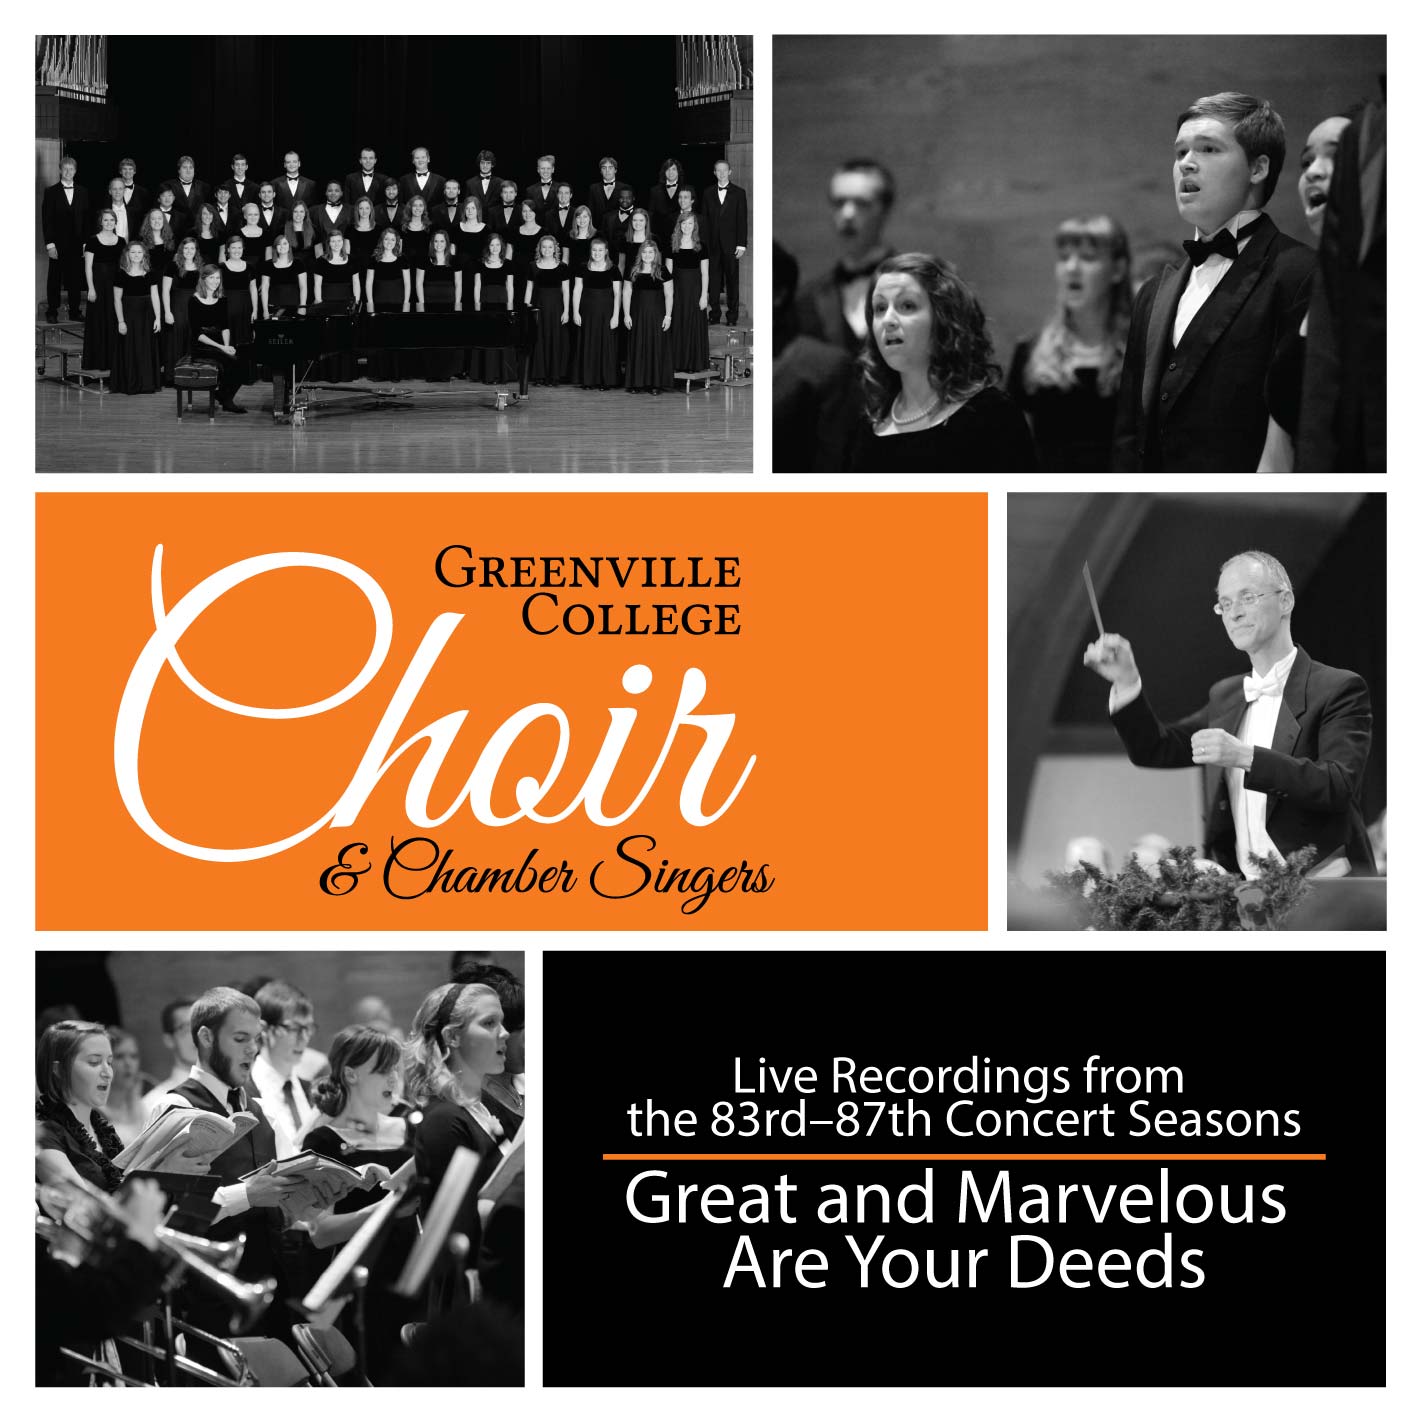 Greenville College Choir Releases New Choral Album